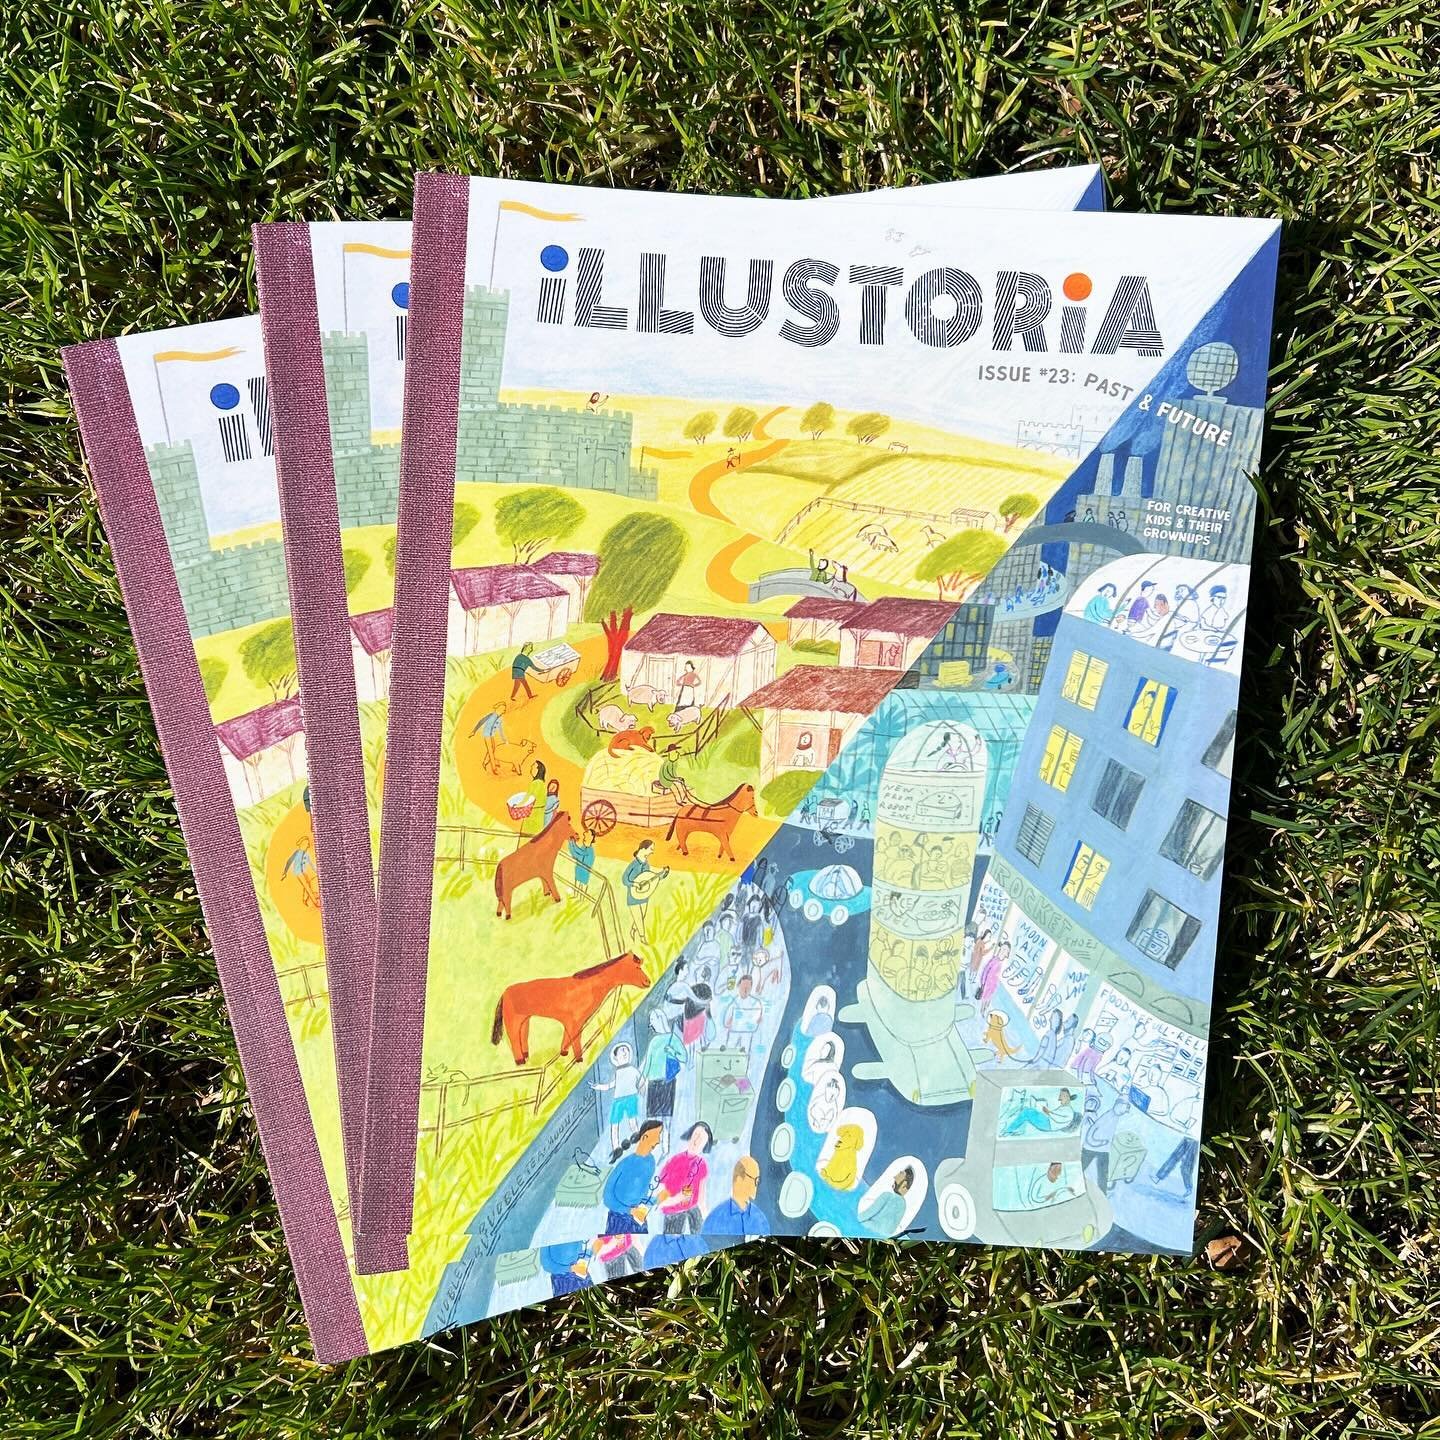 Calling all philosophers, sci-fi buffs, and curious humans, Illustoria 23: Past &amp; Future is OUT TODAY! 🚀🏔️

Join us as we dream of tomorrow and recall days of yore. Subscribe before Sunday, March 31, and receive ✨️$5 off this time-traveling iss